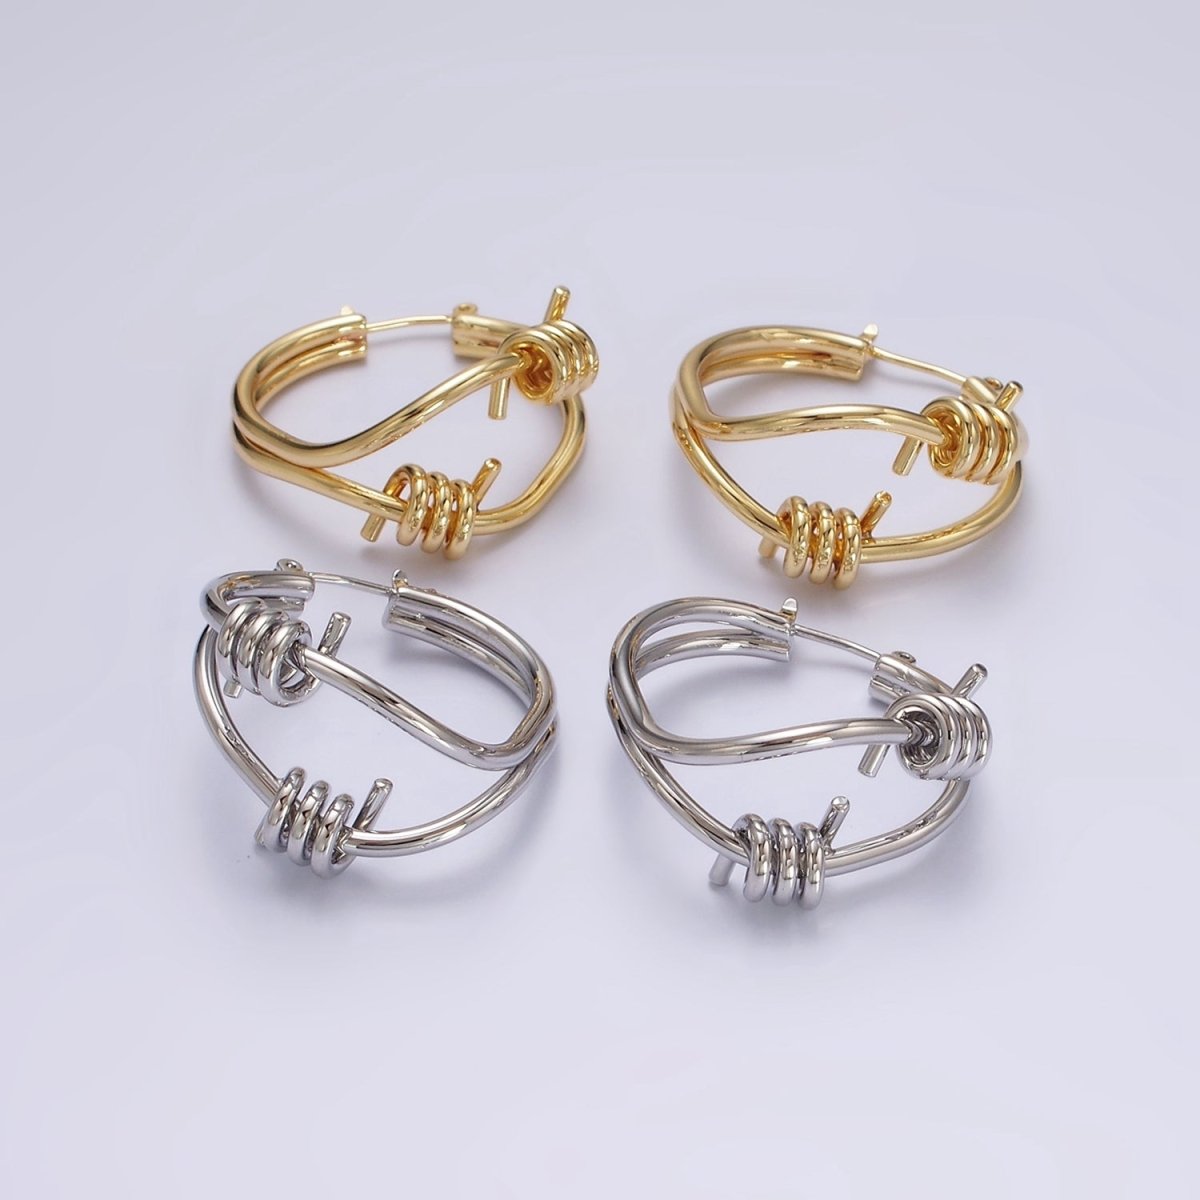 24K Gold Filled 30mm Double Spiral Abstract Band French Lock Latch Hoop Earrings in Gold & Silver | AE090 AE091 - DLUXCA